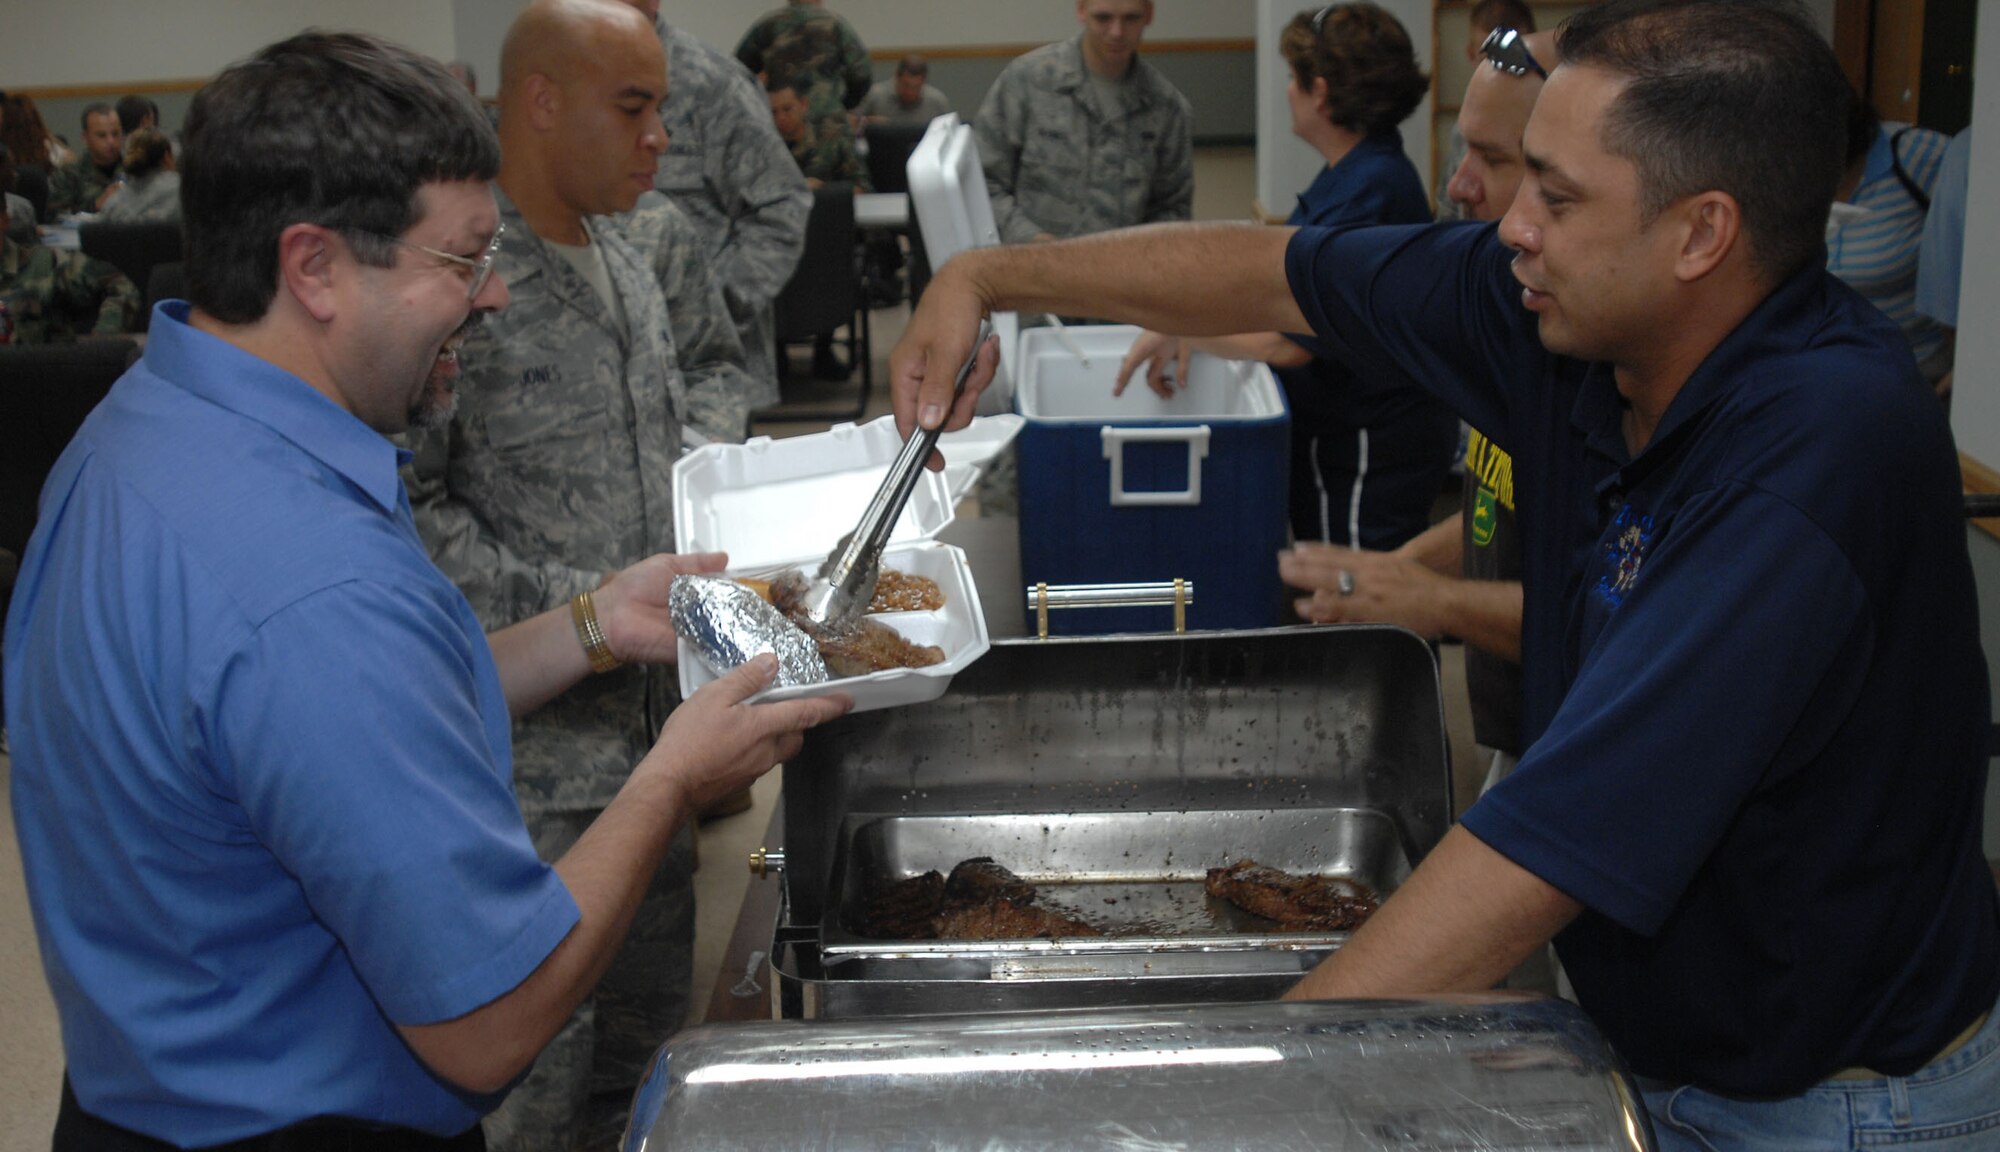 CANNON AIR FORCE BASE, N.M.- Master Sgt. Todd Christman, 27th Special Operations Civil Engineer Squadron, serves Tim Farmer, 27th SOCES, his share of steak at the First Sergeants' Steak Sale Aug. 22. The annual luncheon was attended by more than 100 people. (U.S. Air Force photo/ Airman Maynelinne De La Cruz)